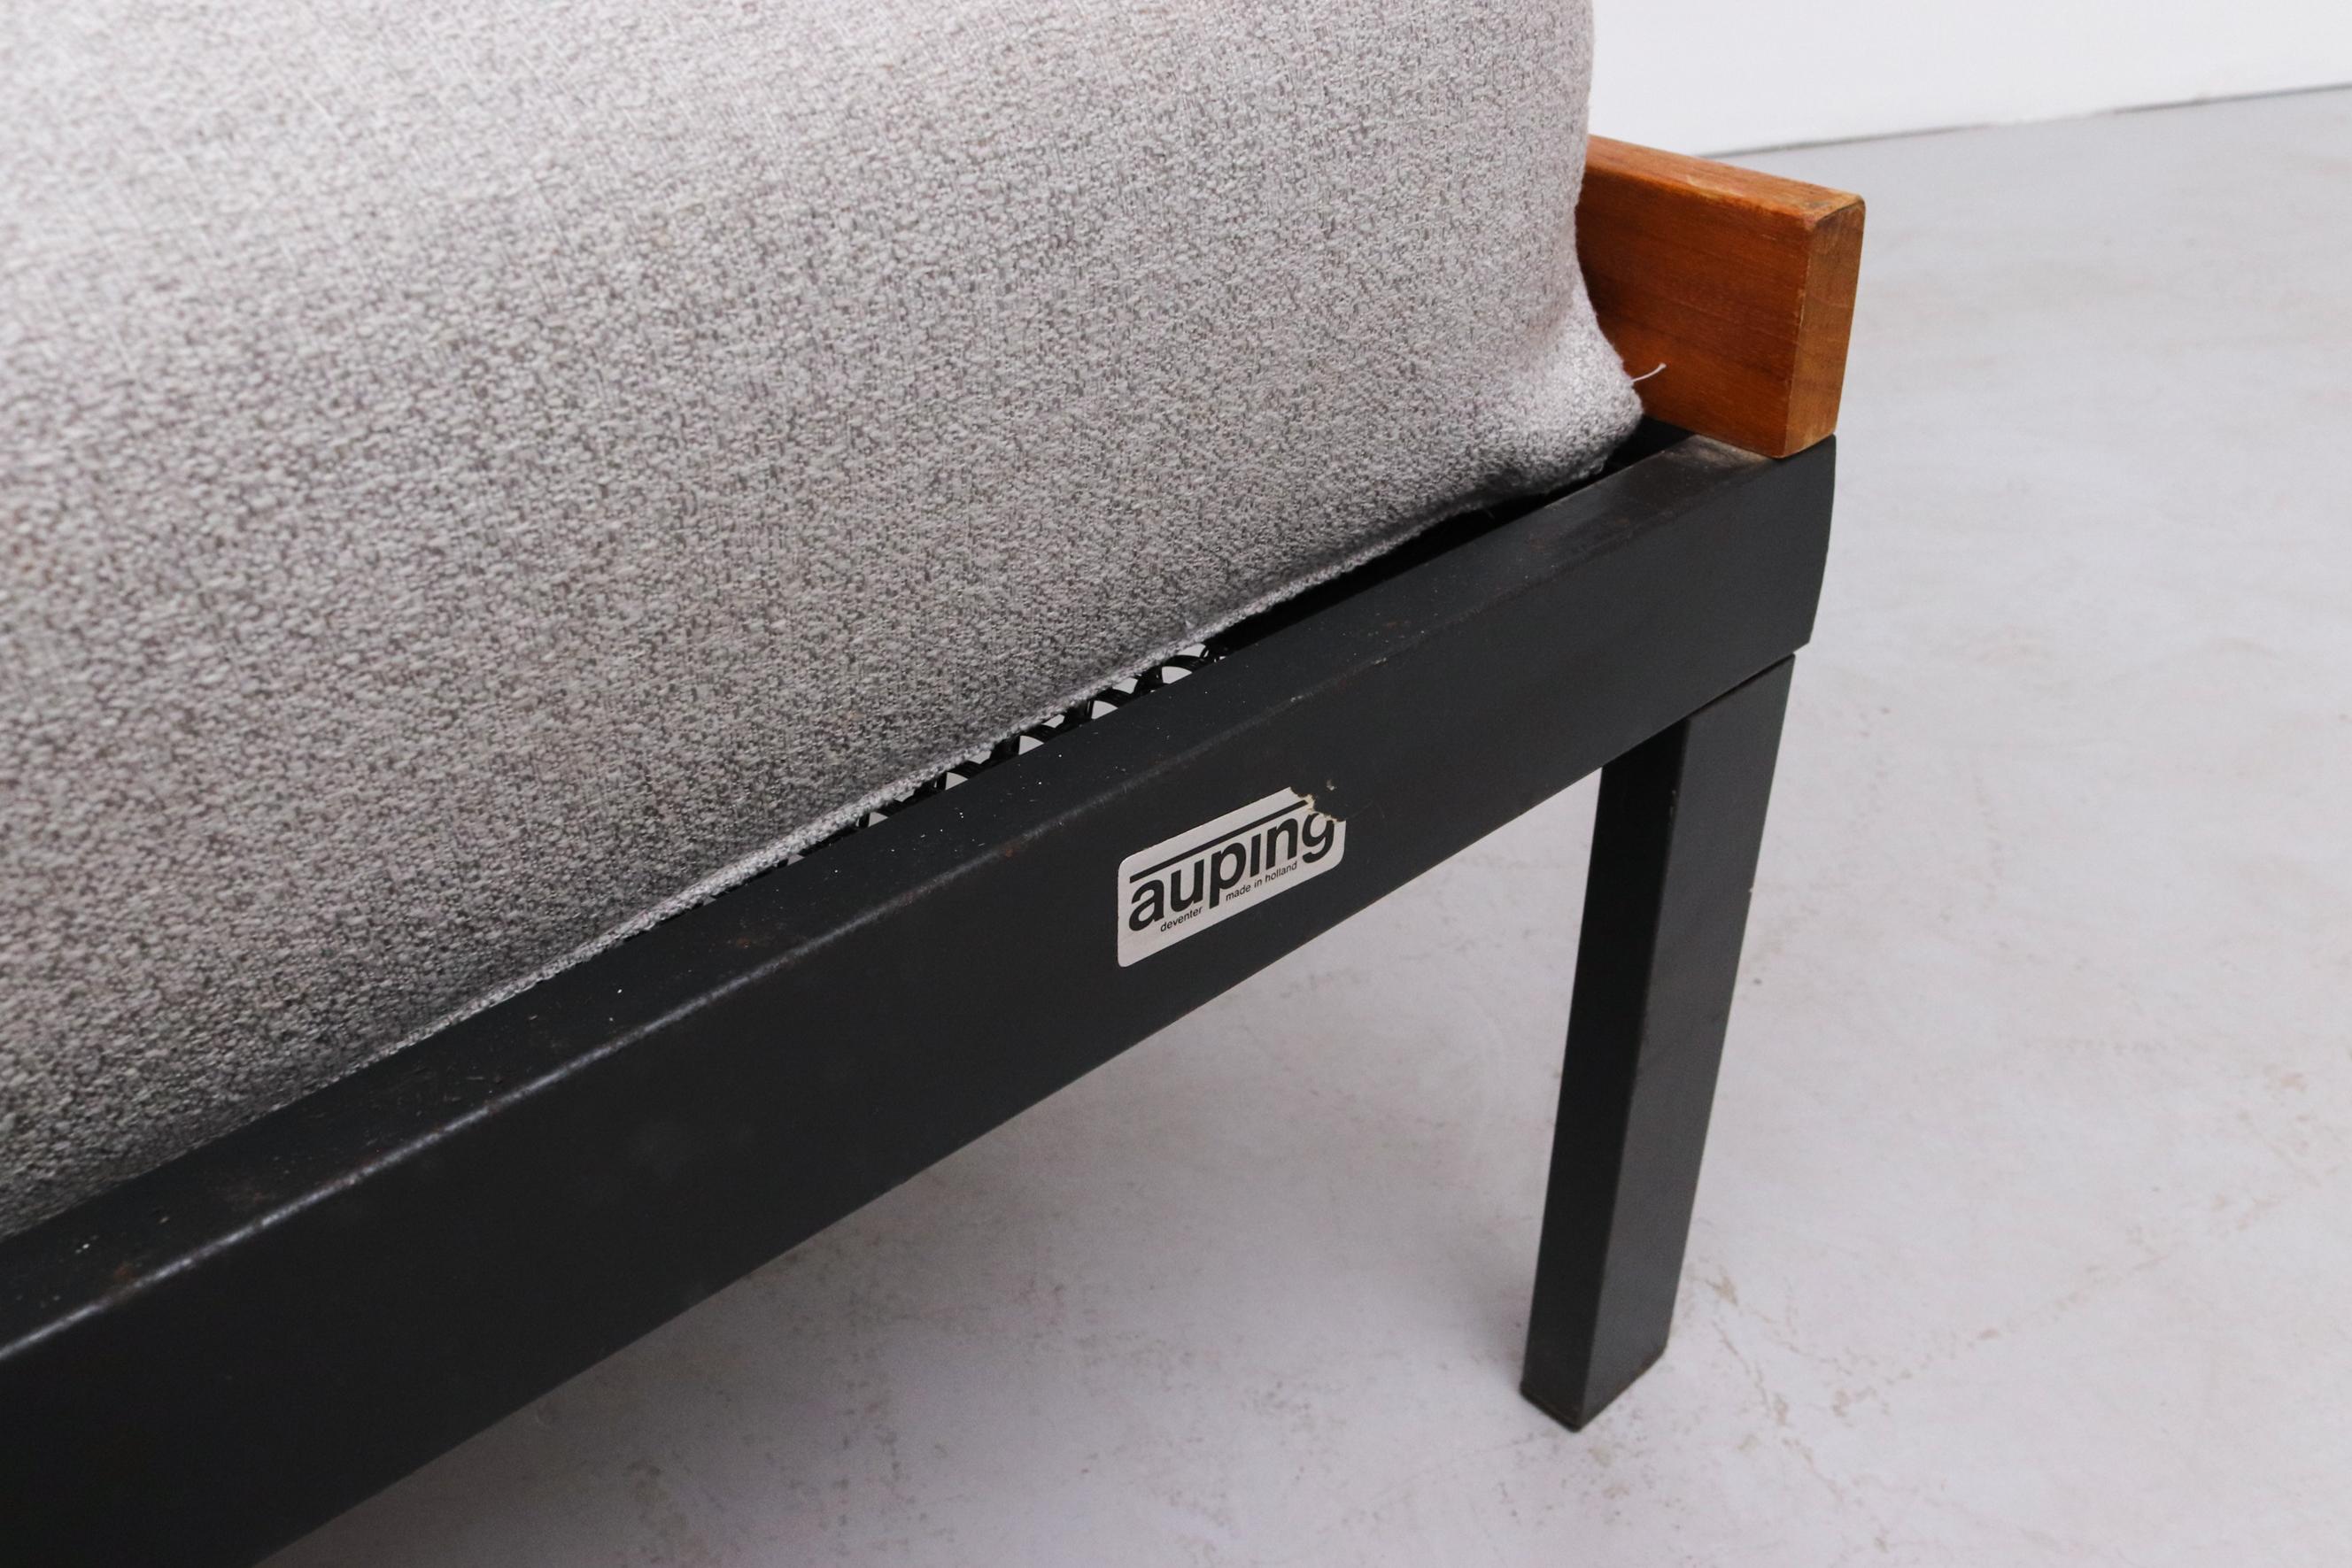 Friso Kramer 'Couchette' Wood & Black Daybed for Auping, 1965 w/ New Cushions For Sale 2